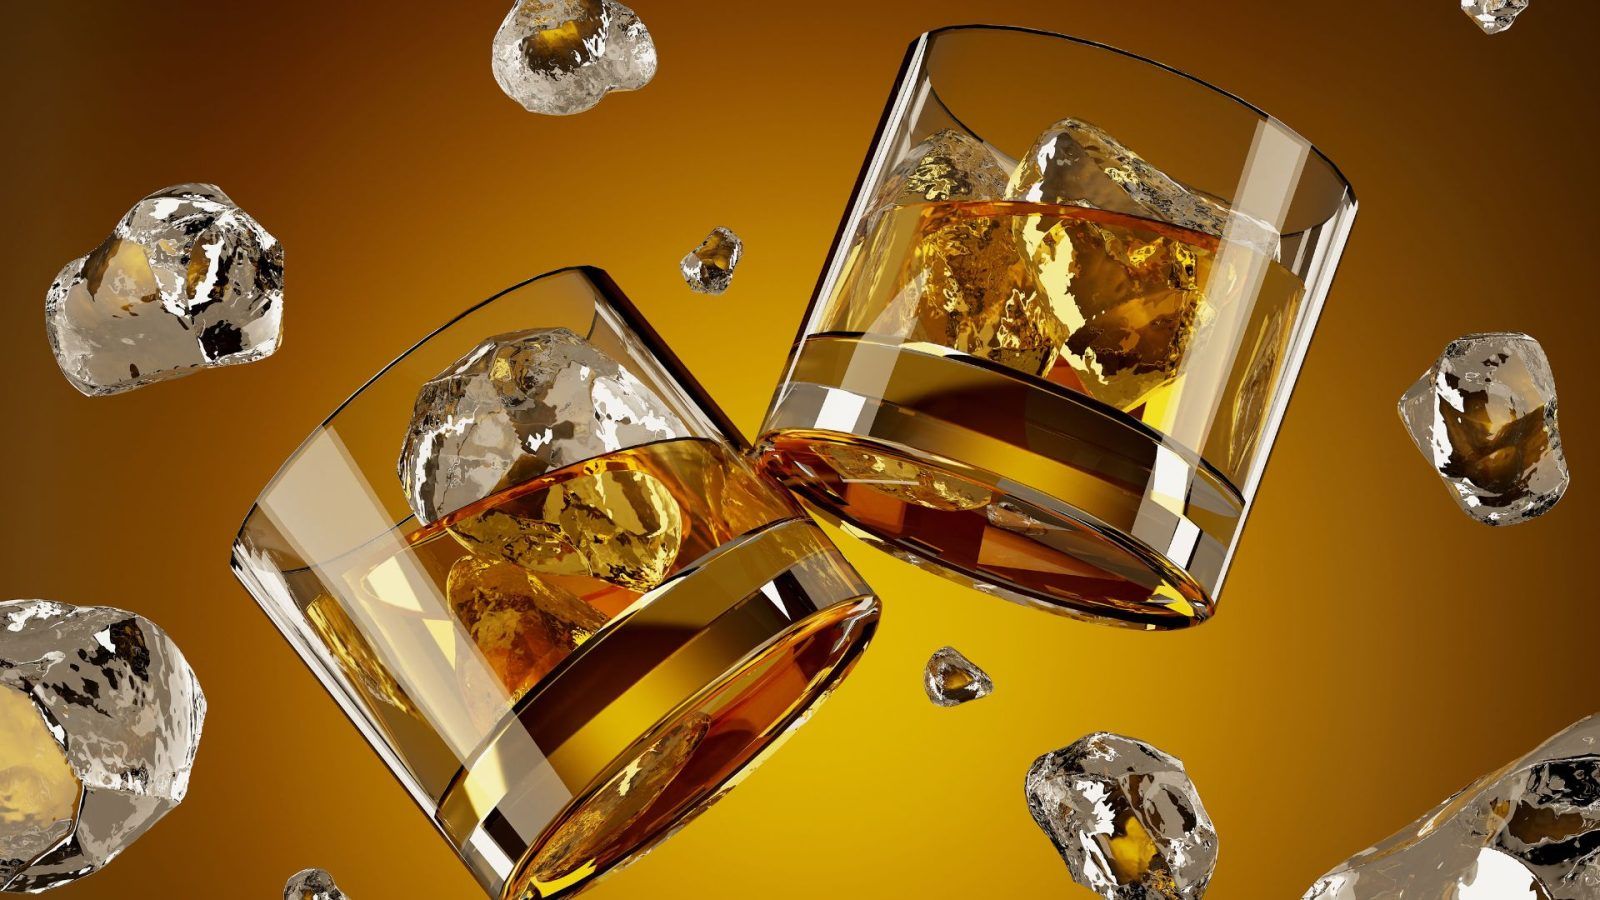 15 Best Whisky In The World: The Whisky Brands To Drink (2023)